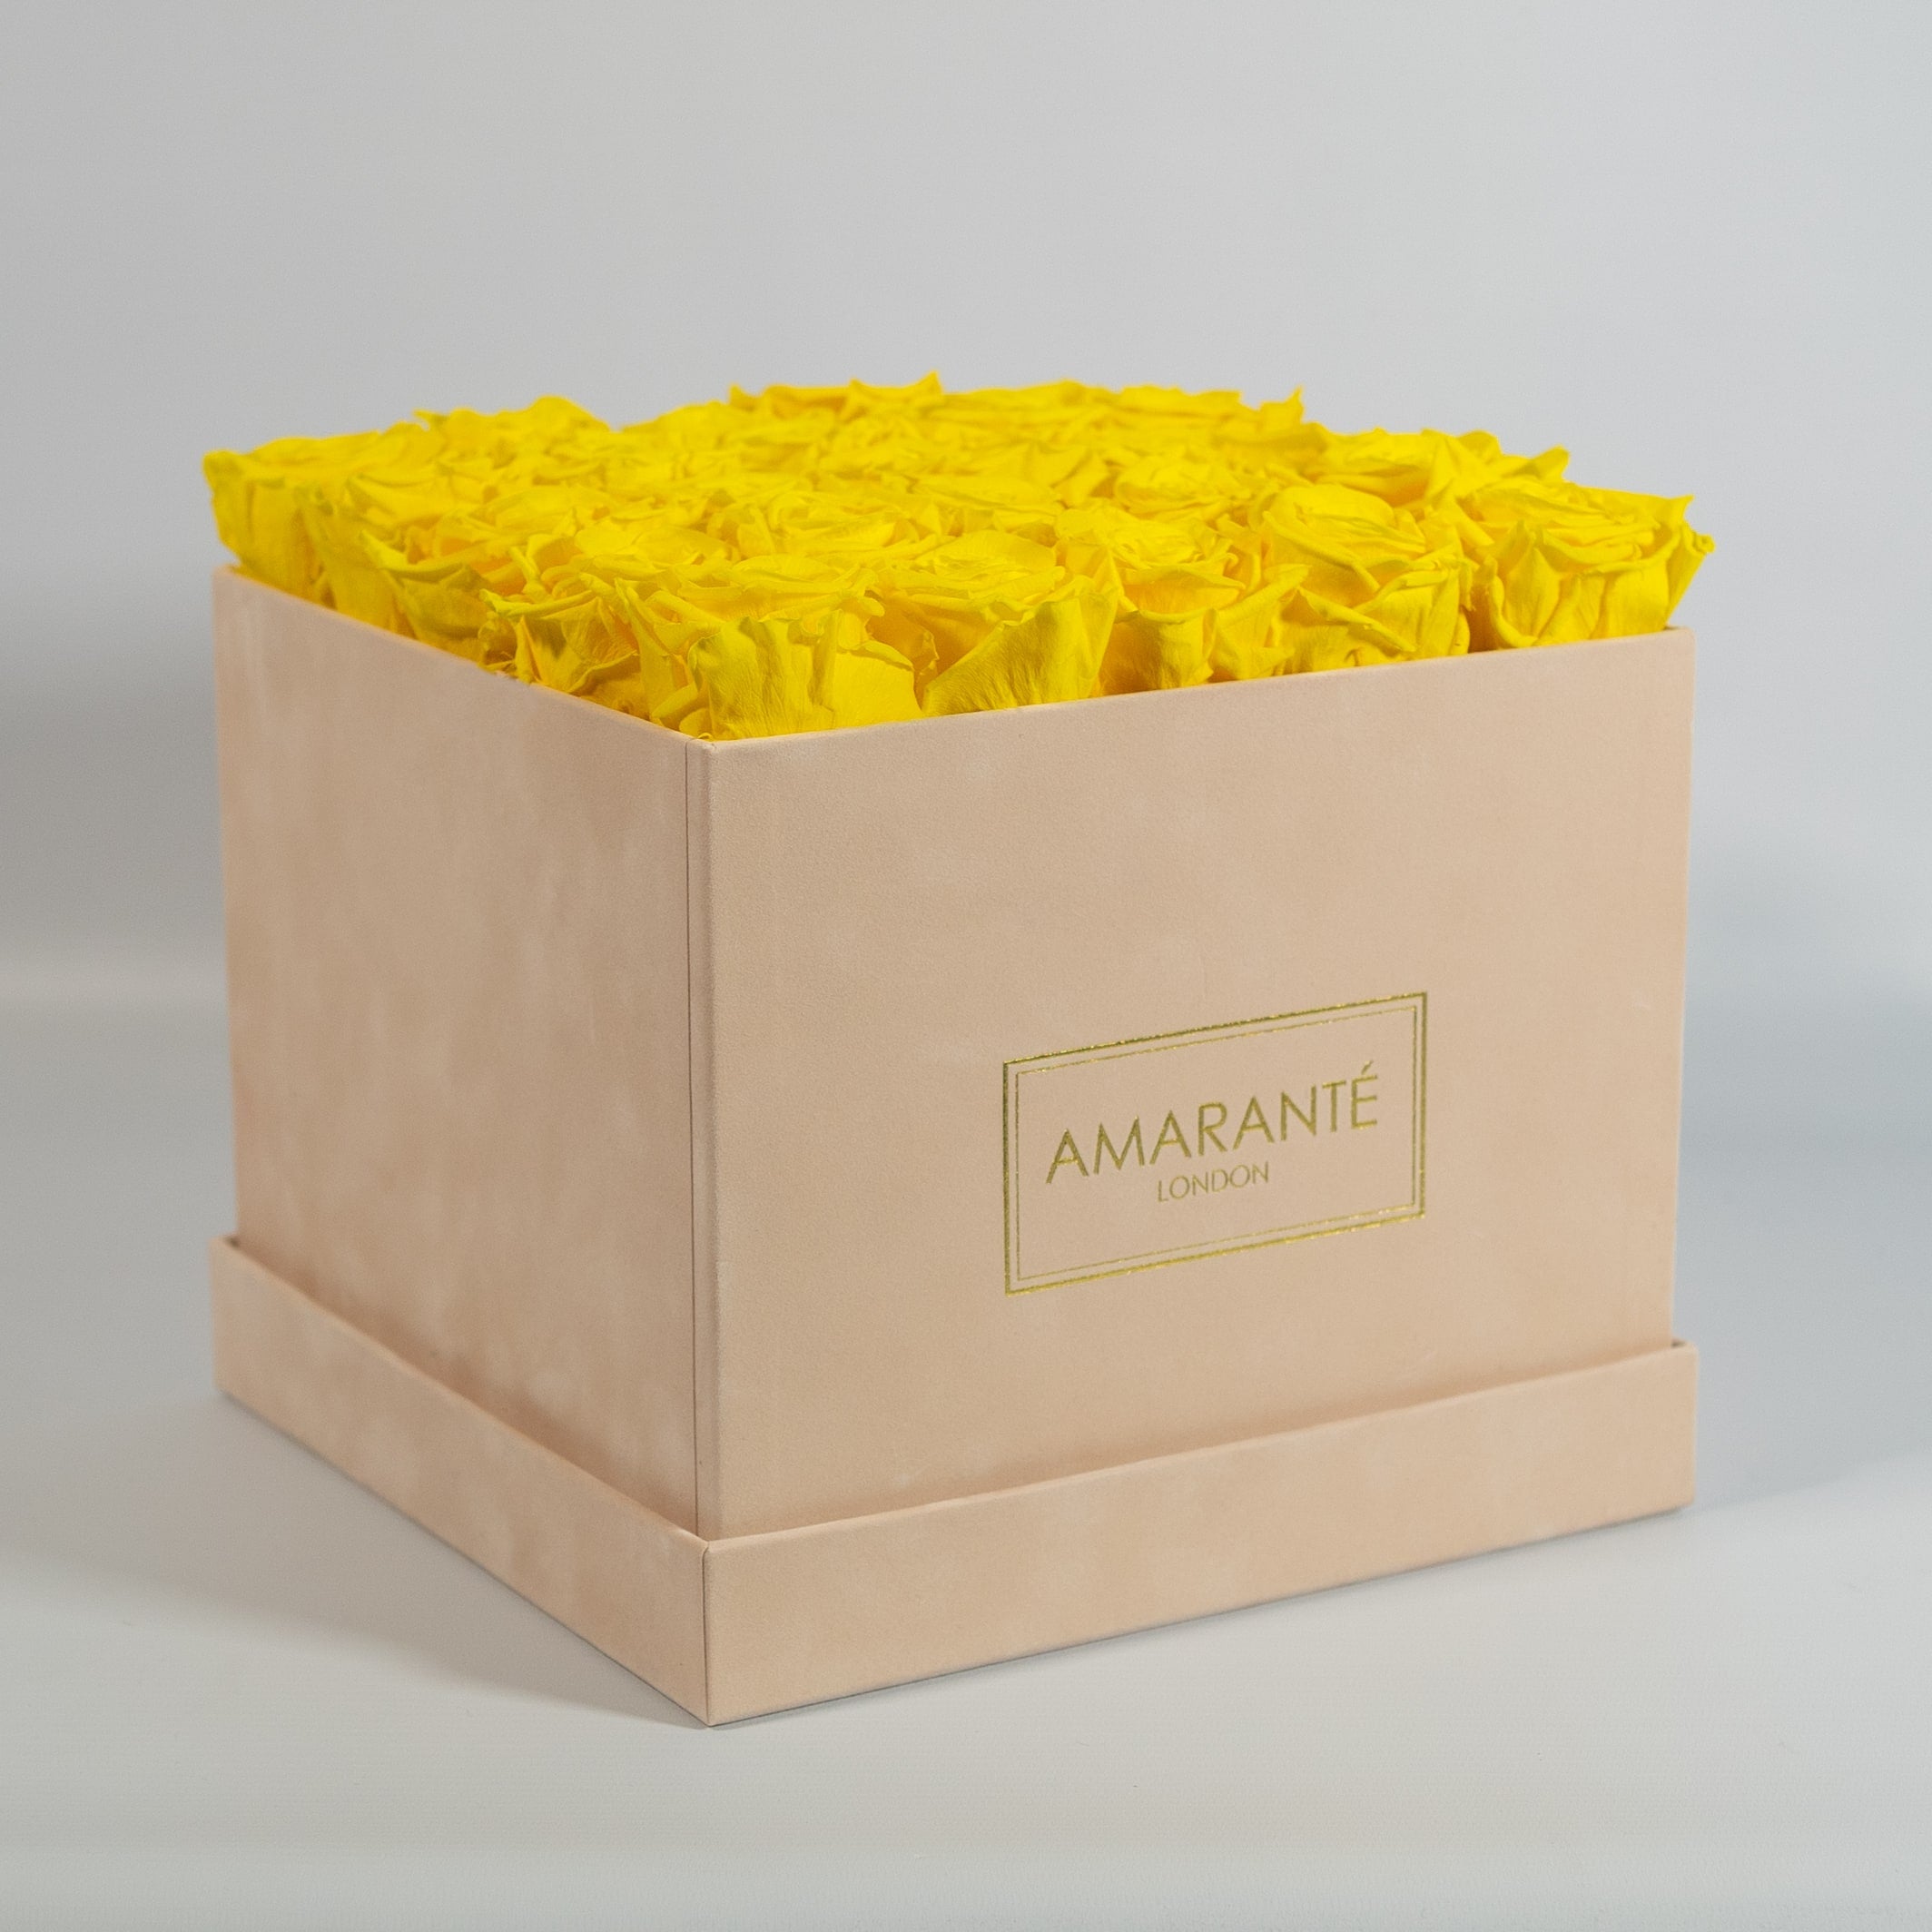 Warm yellow Roses imbedded in a modish beige box.